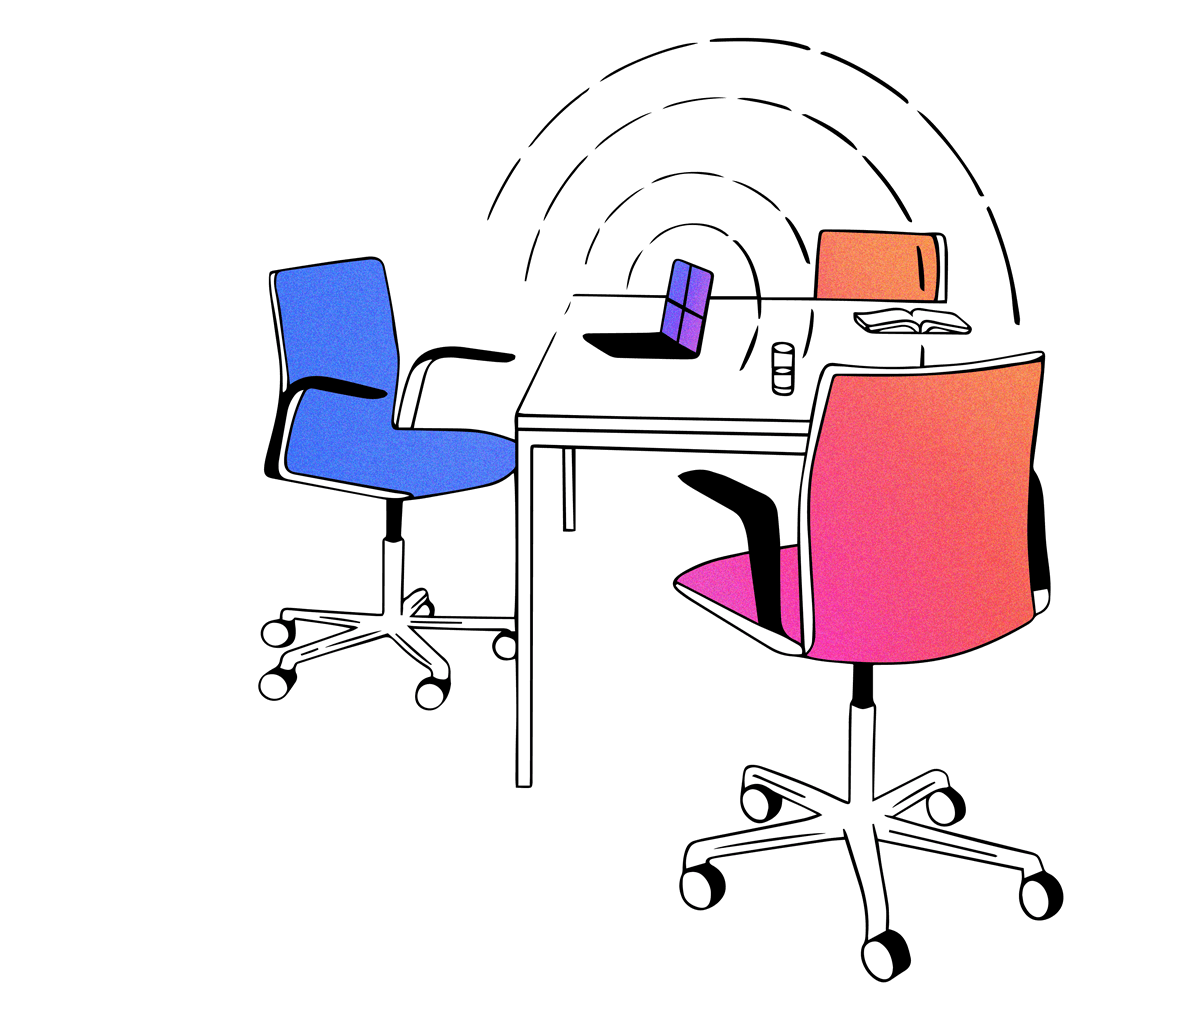 Illustration of connected chairs to illustrate LivePerson's Peer Exchange as an advisory board